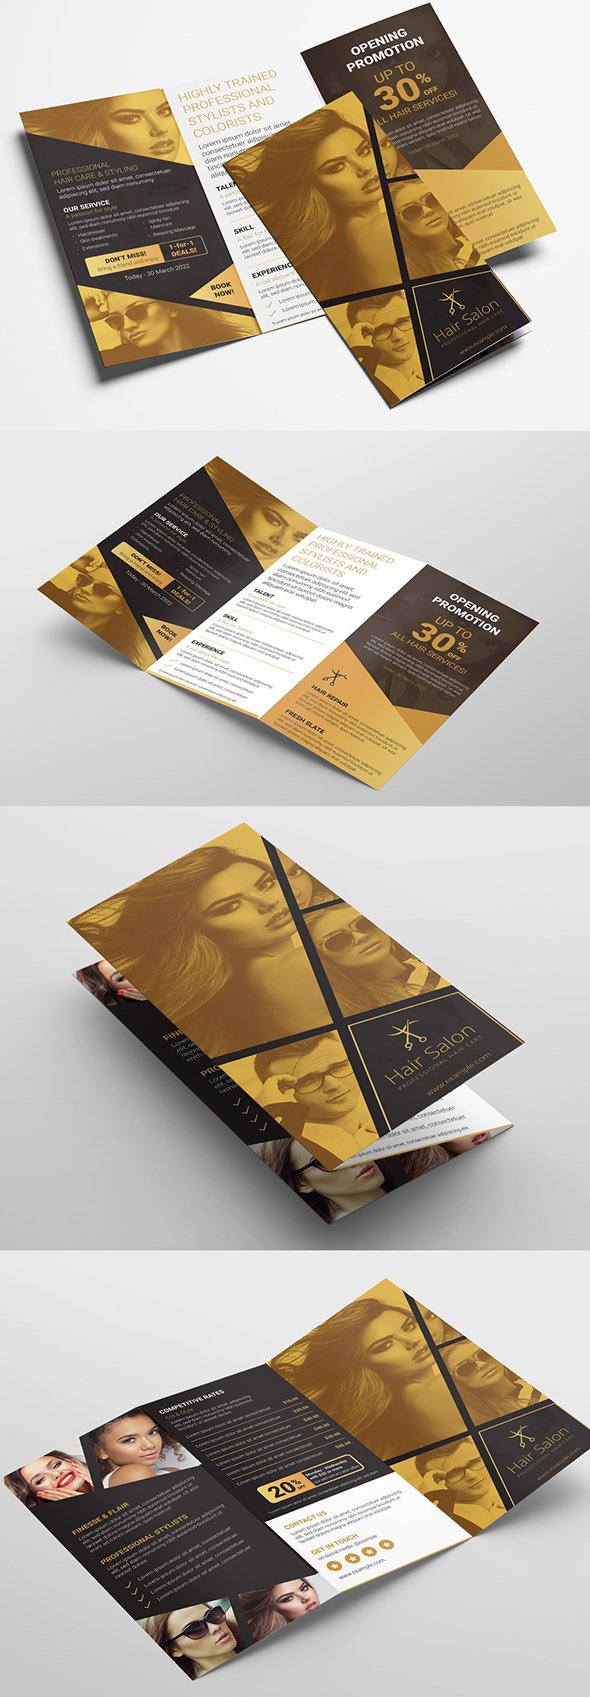 AdobeStock - Black and Gold Trifold Brochure Layout - 333031078